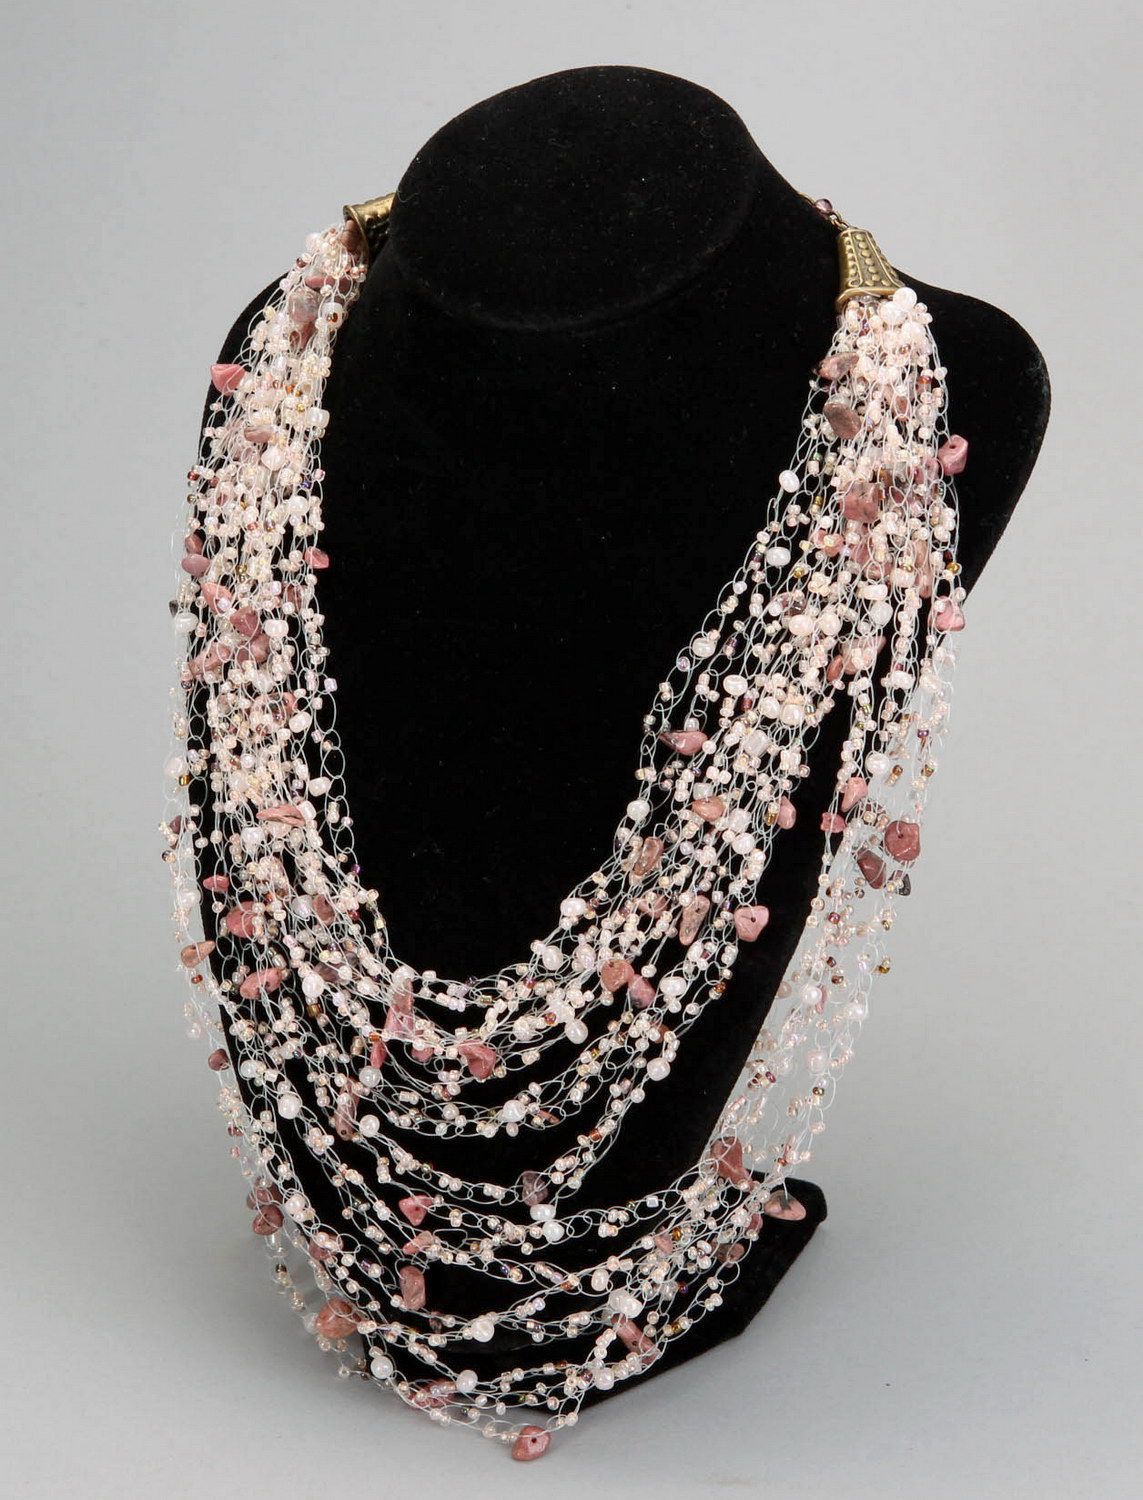 Necklace made of rhodonite fragments photo 5